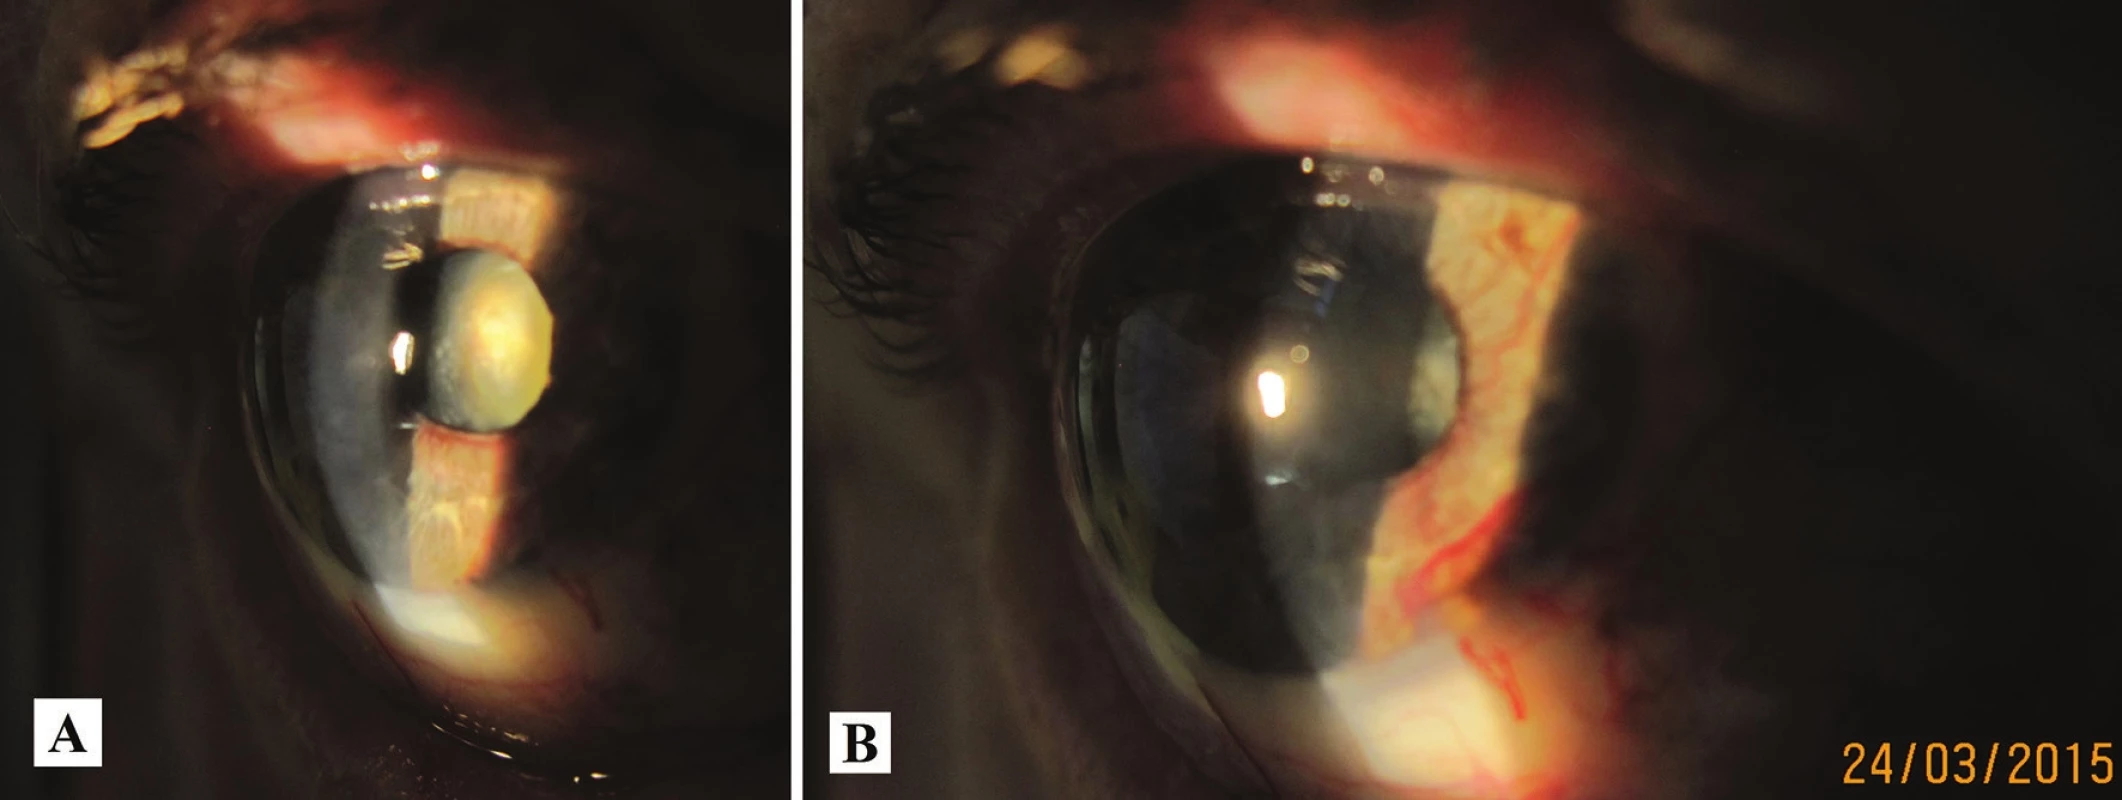 Macro photo of anterior segment of eye of same patient in 2015 – progression of cataract (A), accentuation of neovascularisation of isis (B)